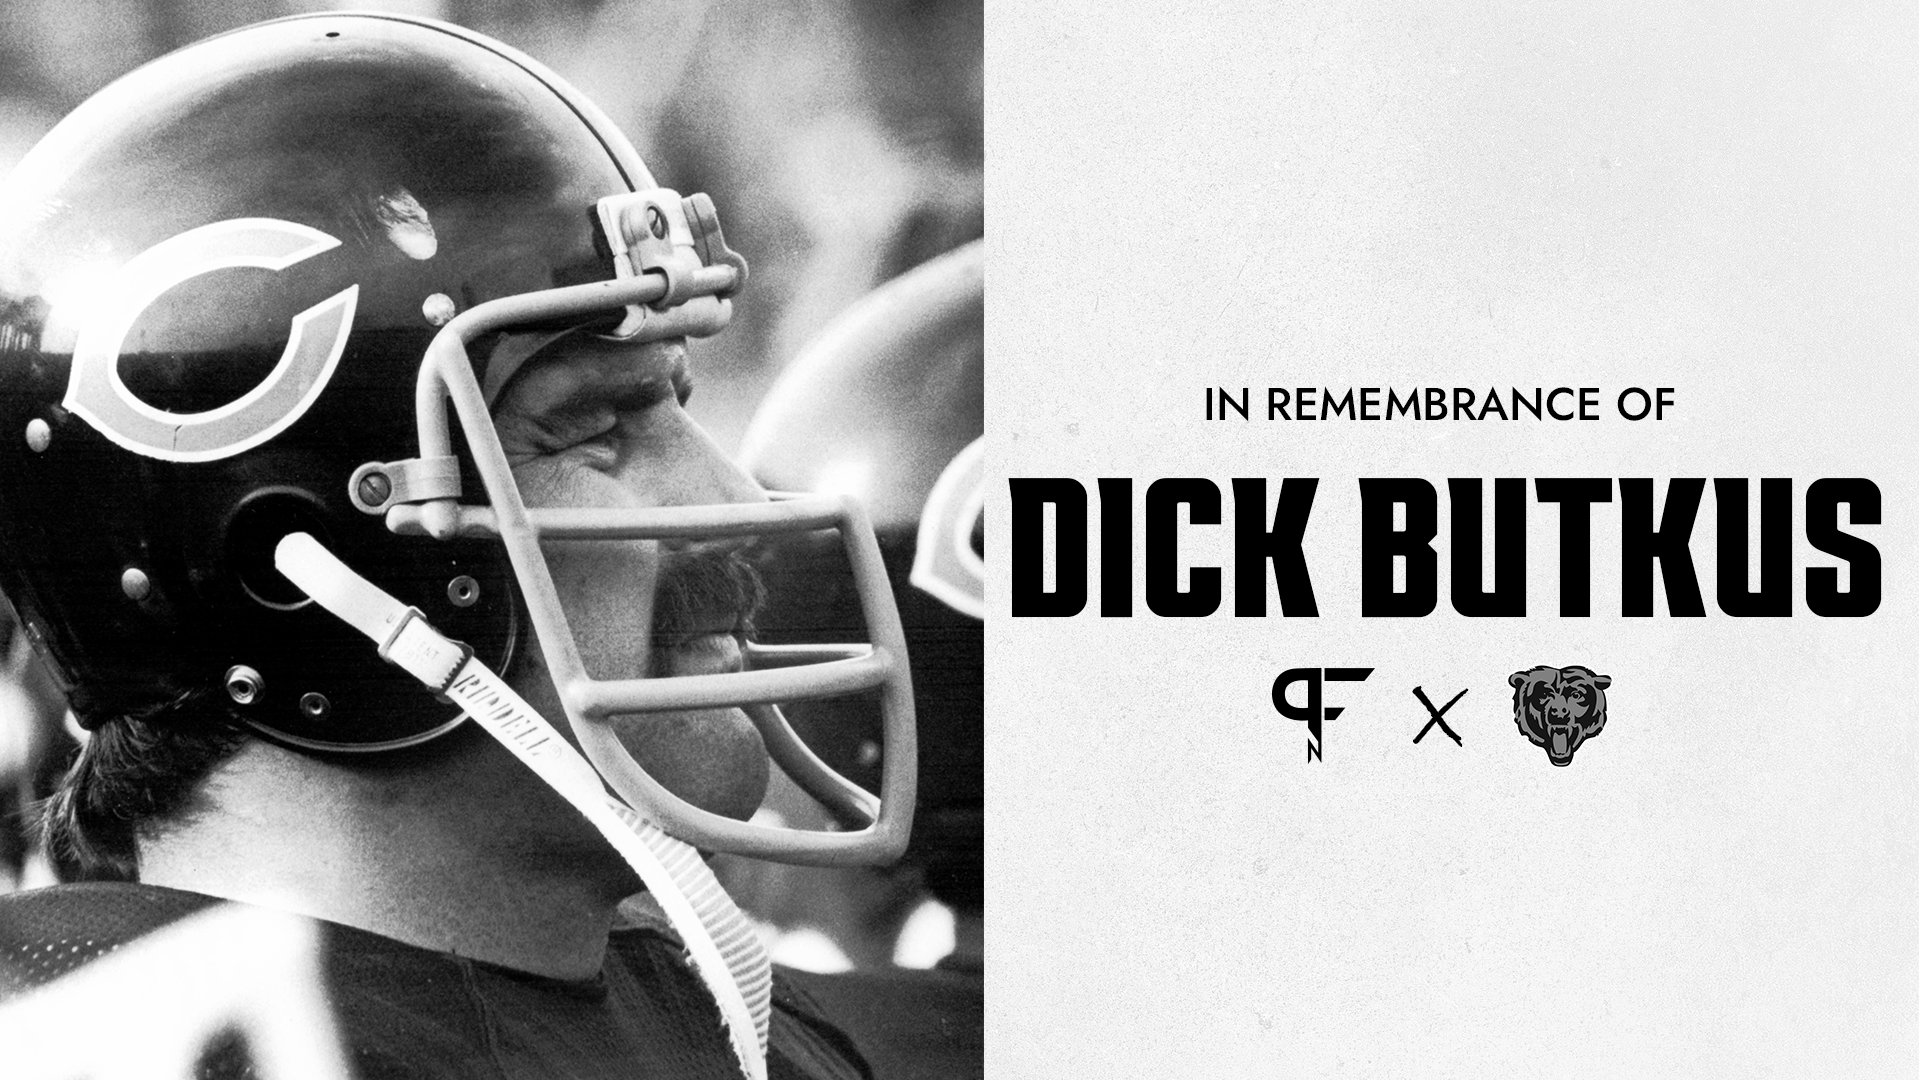 The Passing of Dick Butkus: Reaction to Death of Chicago Bears Icon